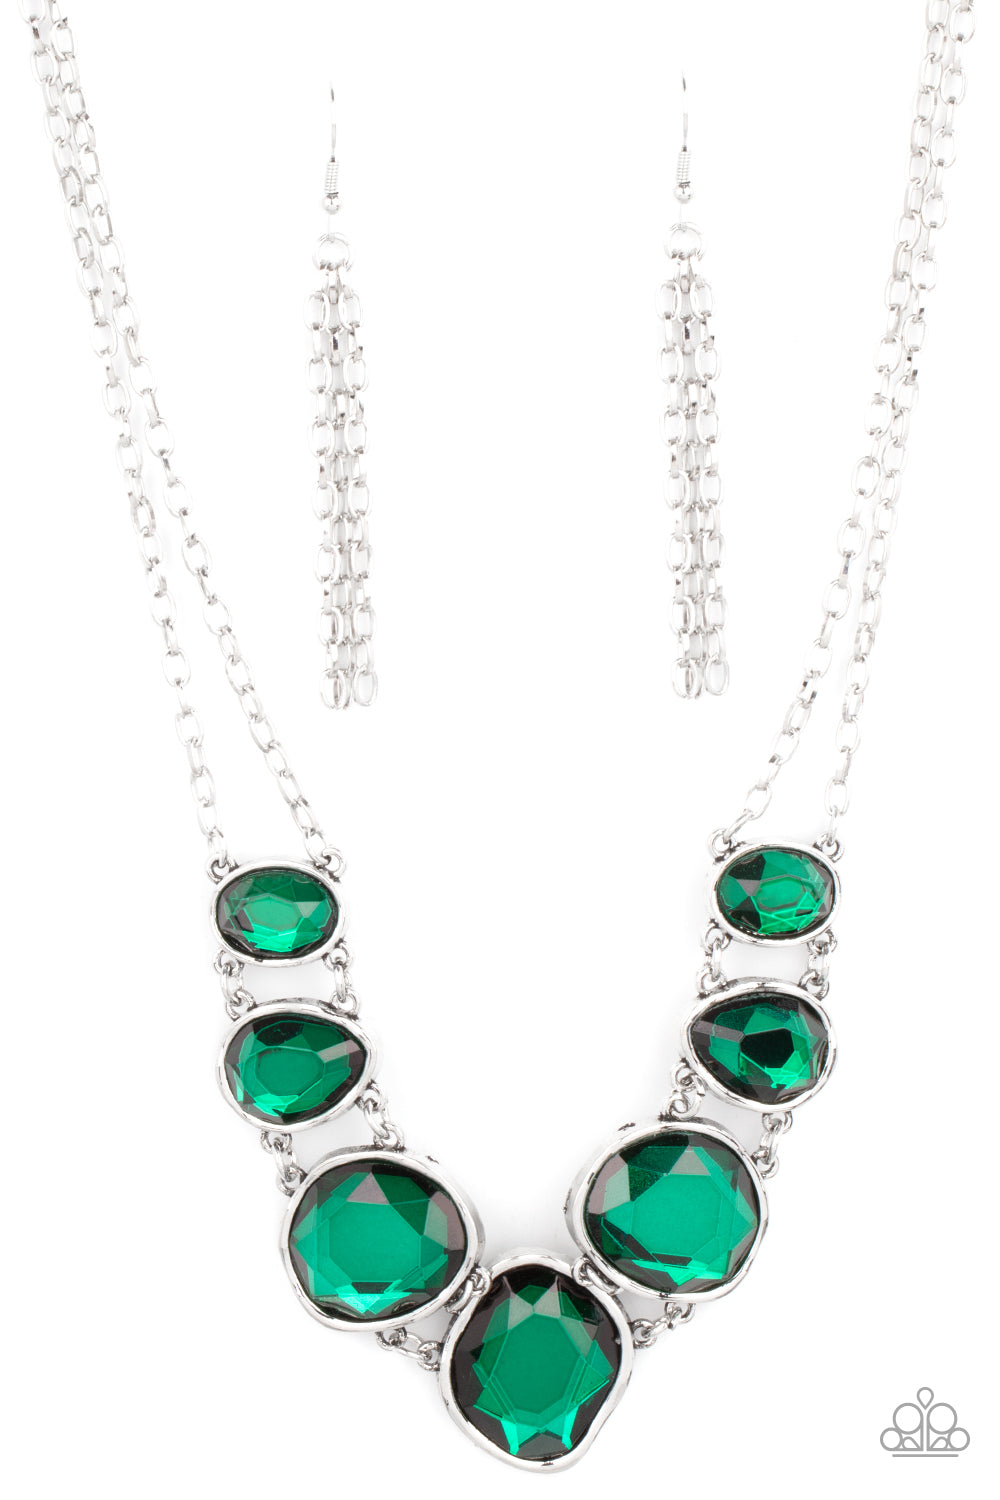 Absolute Admiration - Green Necklace - Paparazzi Accessories - Paparazzi Accessories 